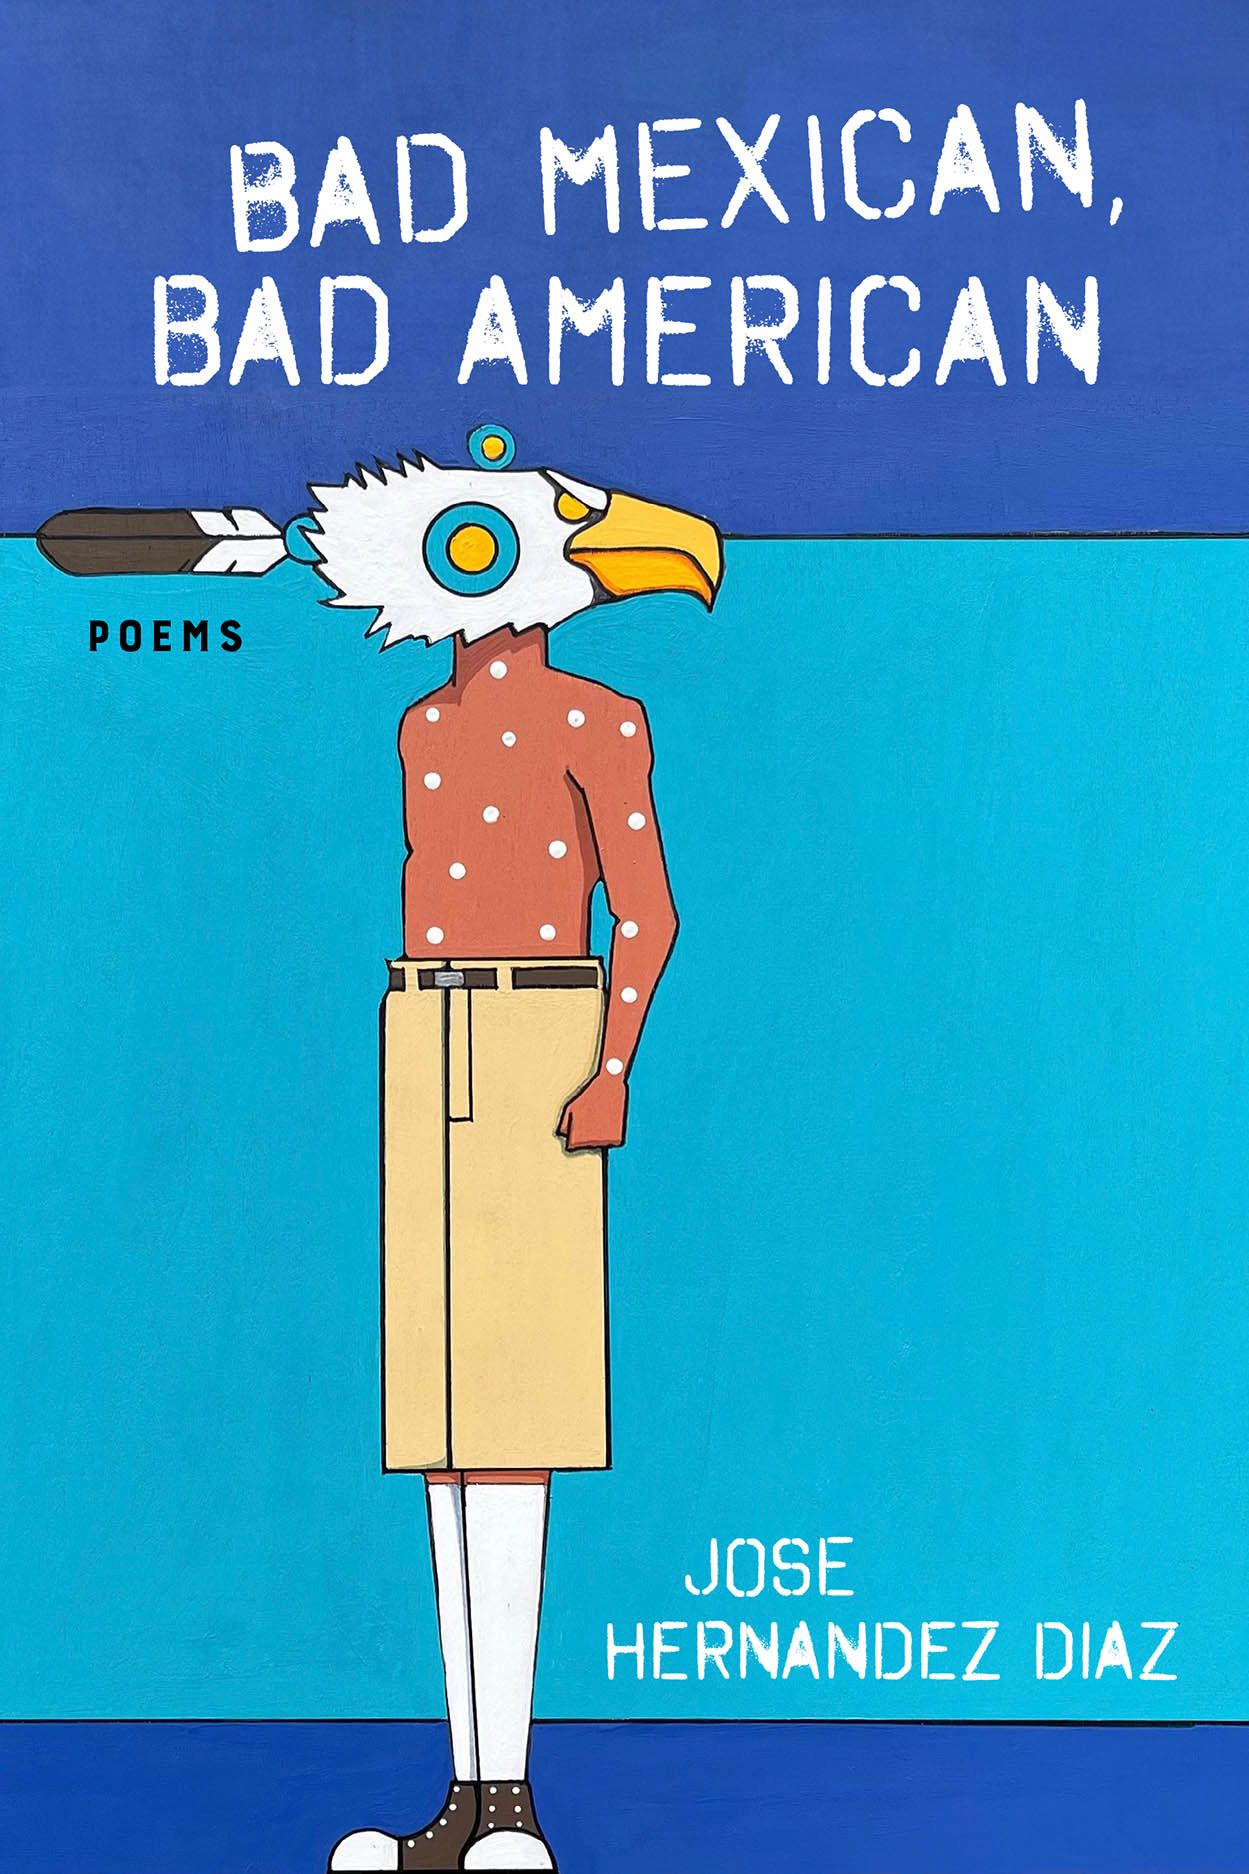 Bad Mexican, bad American book cover